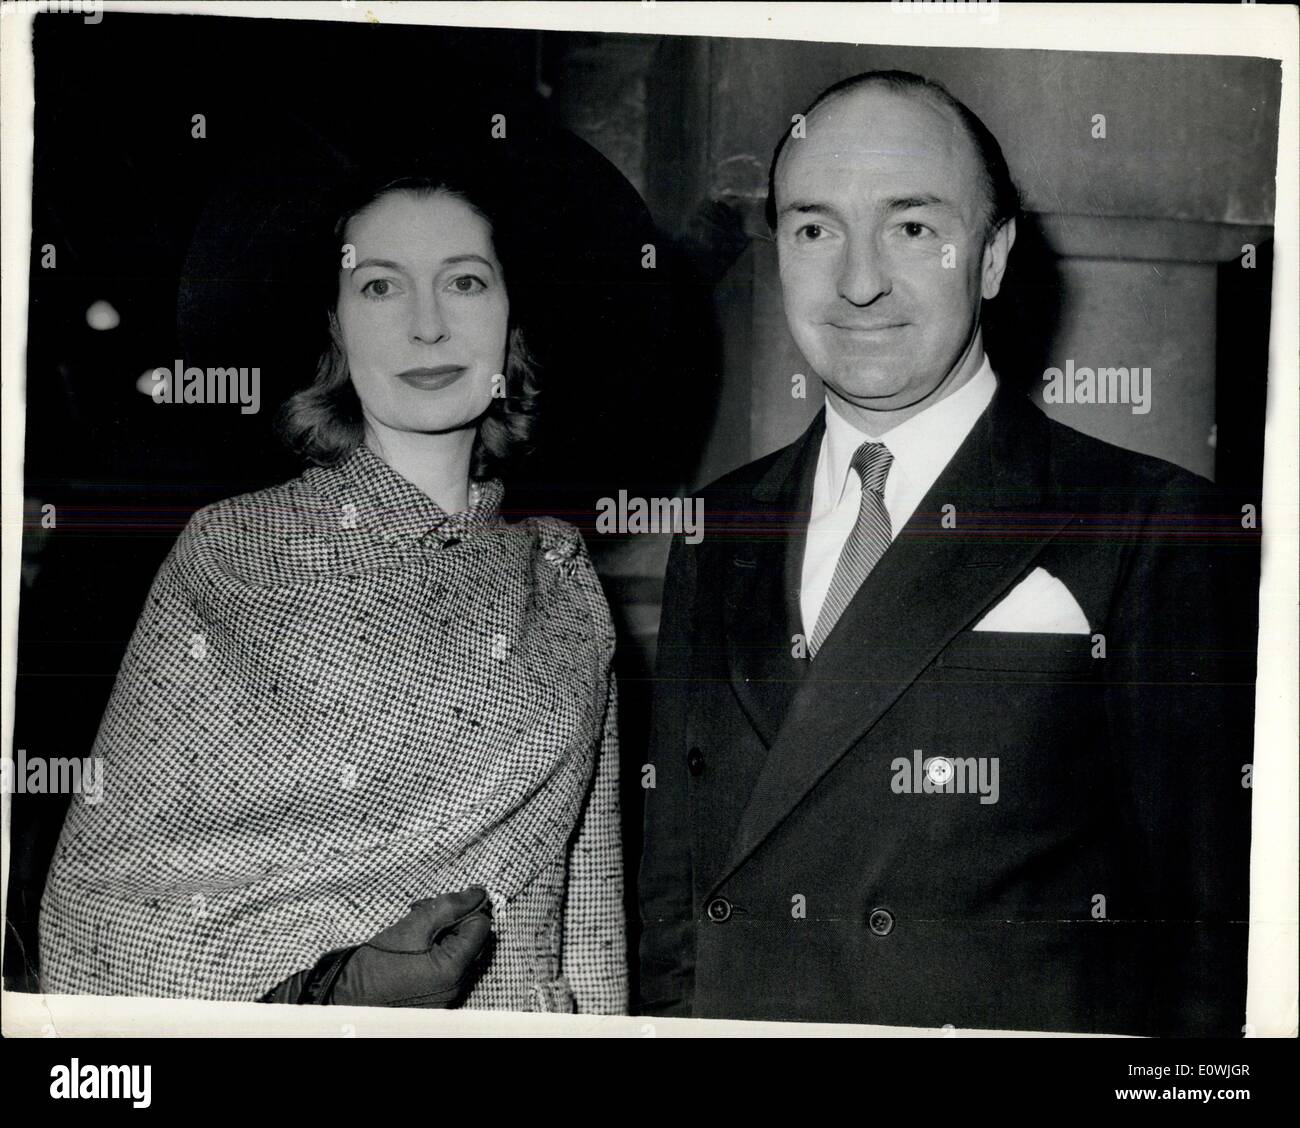 Jun. 05, 1963 - Profumo Resigns: Mr. John Profumo the Minister for war has written to the Prime Minister resigning from the Government, the resignation has been accepted. In his letter he states that when he made a statement in the House of Commons on March 22, in which he denied that there had been any impropriety in his relationship with Christine Keeler the missing London model, this was in fact not true. He now admitted having deceived the Government, his wife and family, and his legal advisers, and was therefore resigning. Photo shows Mr Stock Photo